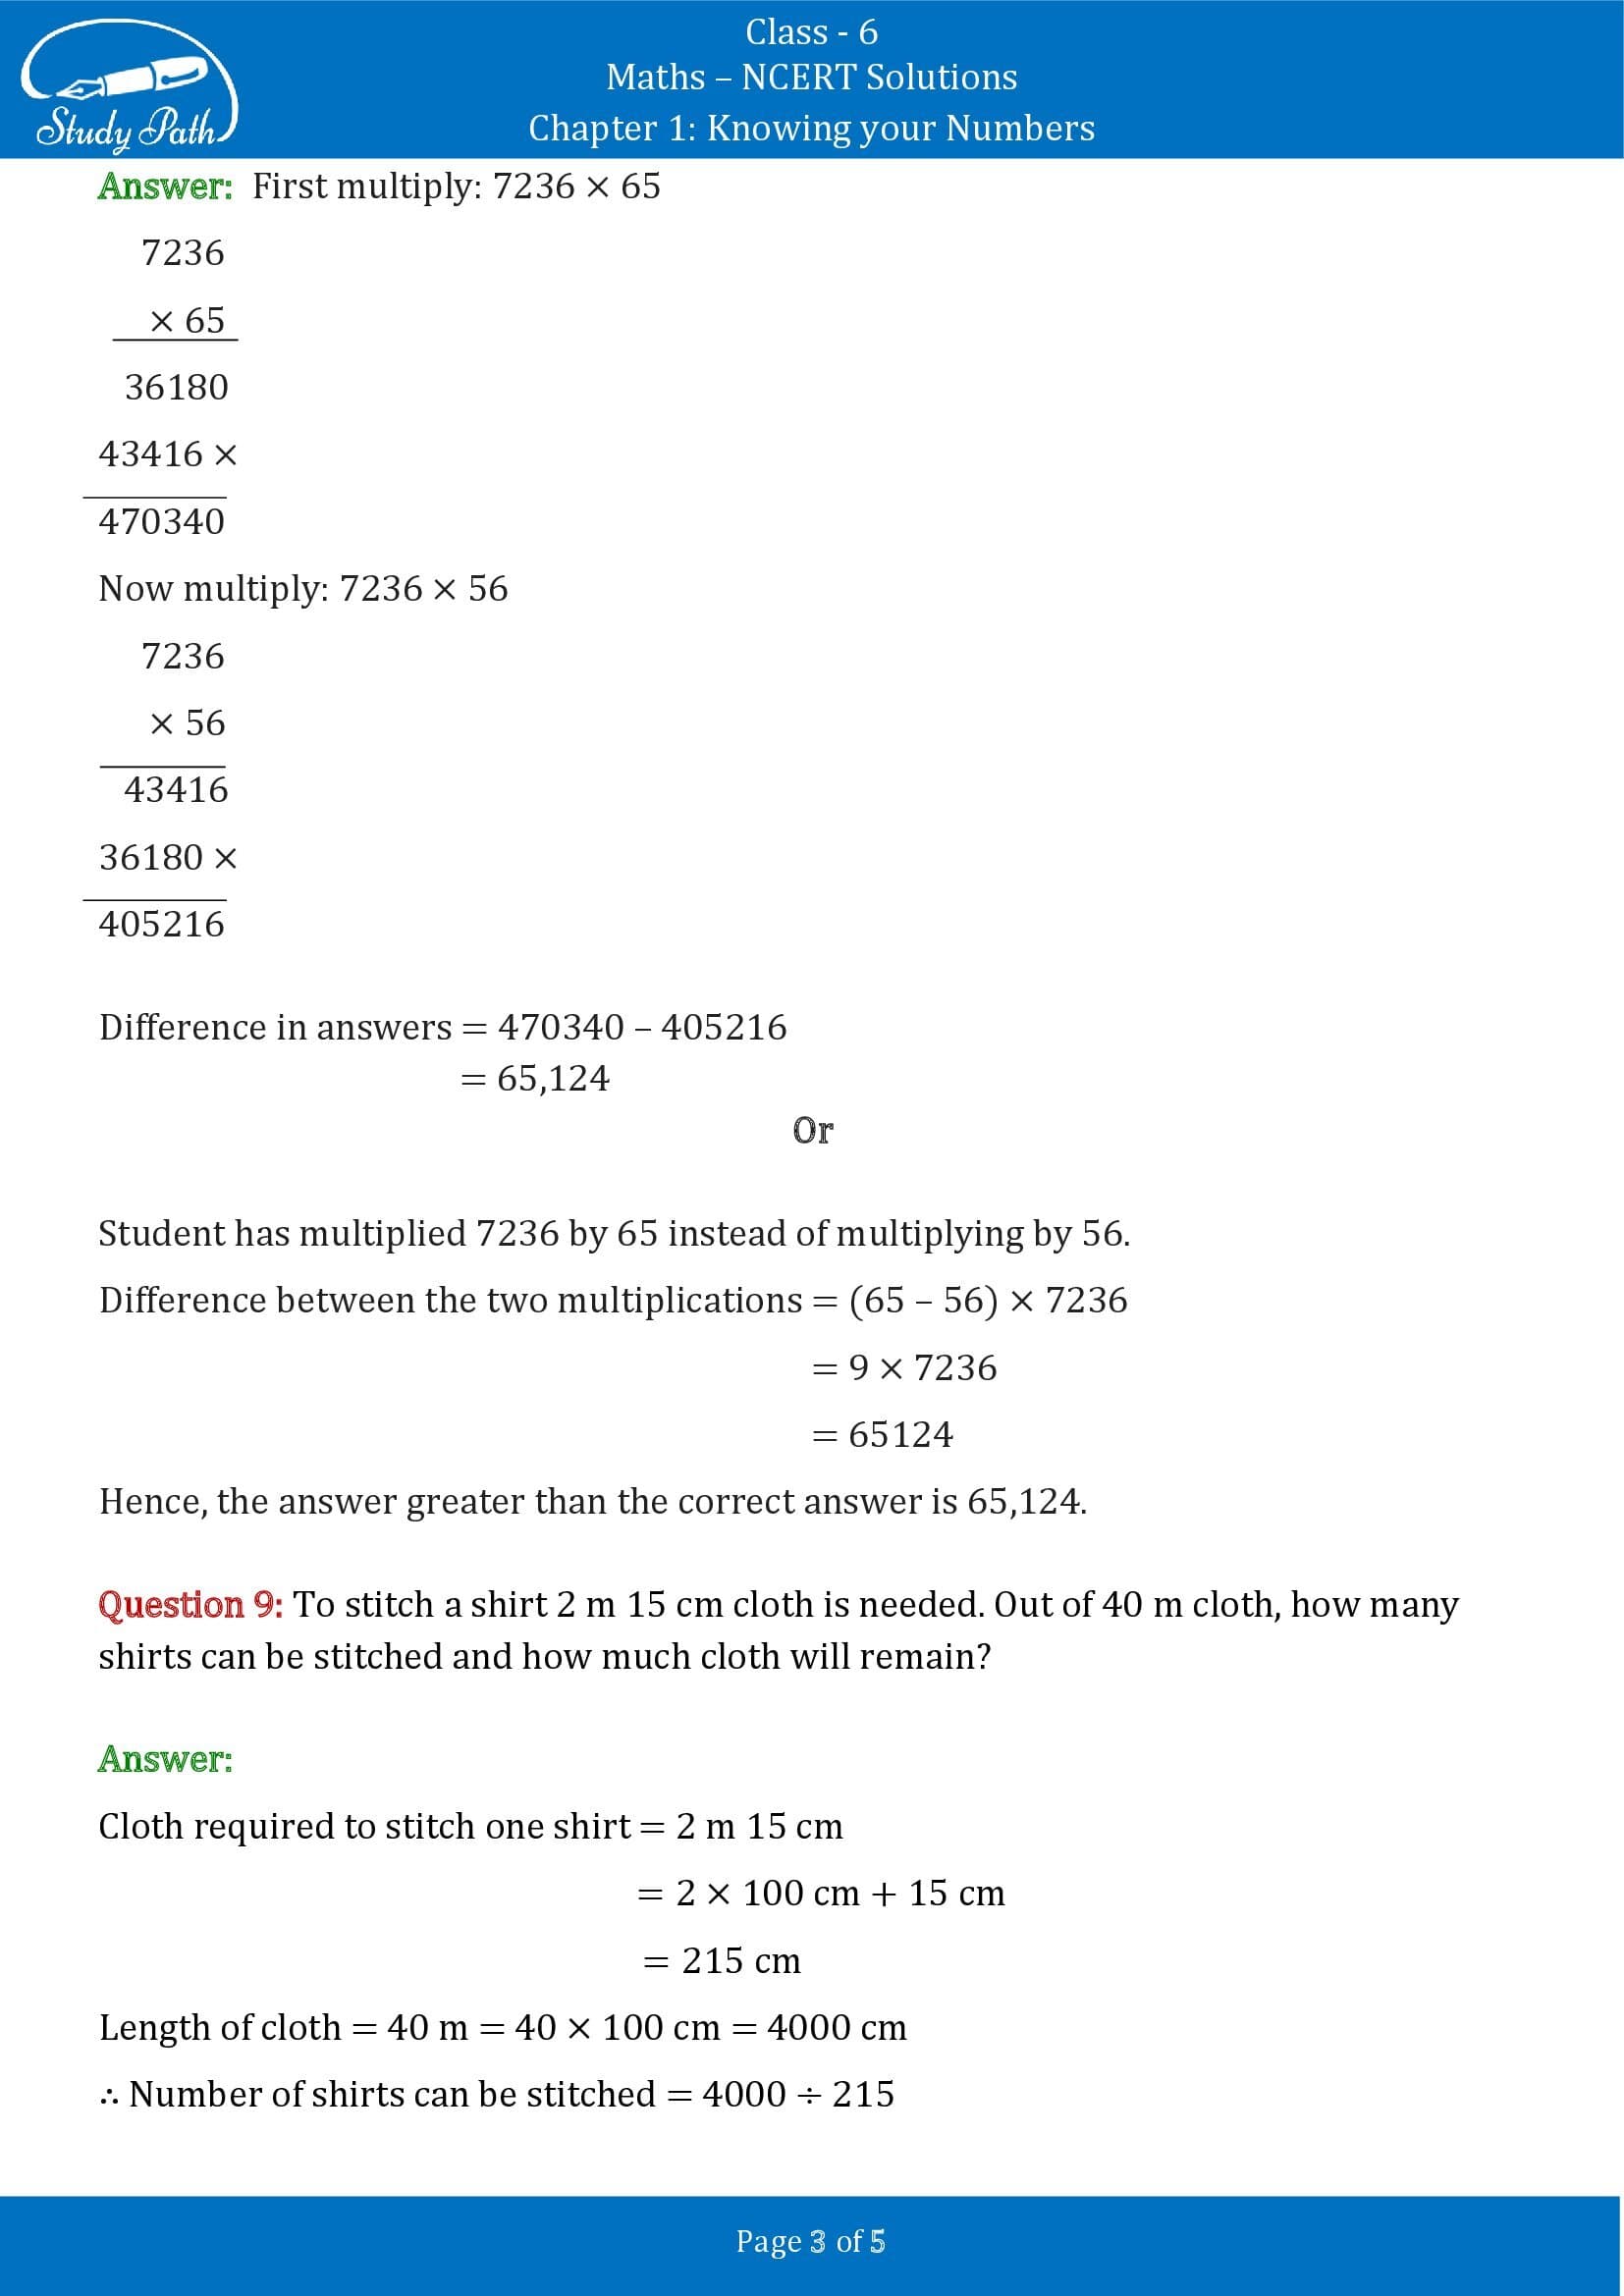 NCERT Solutions for Class 6 Maths Chapter 1 Knowing Your Numbers Exercise 1.2 00003